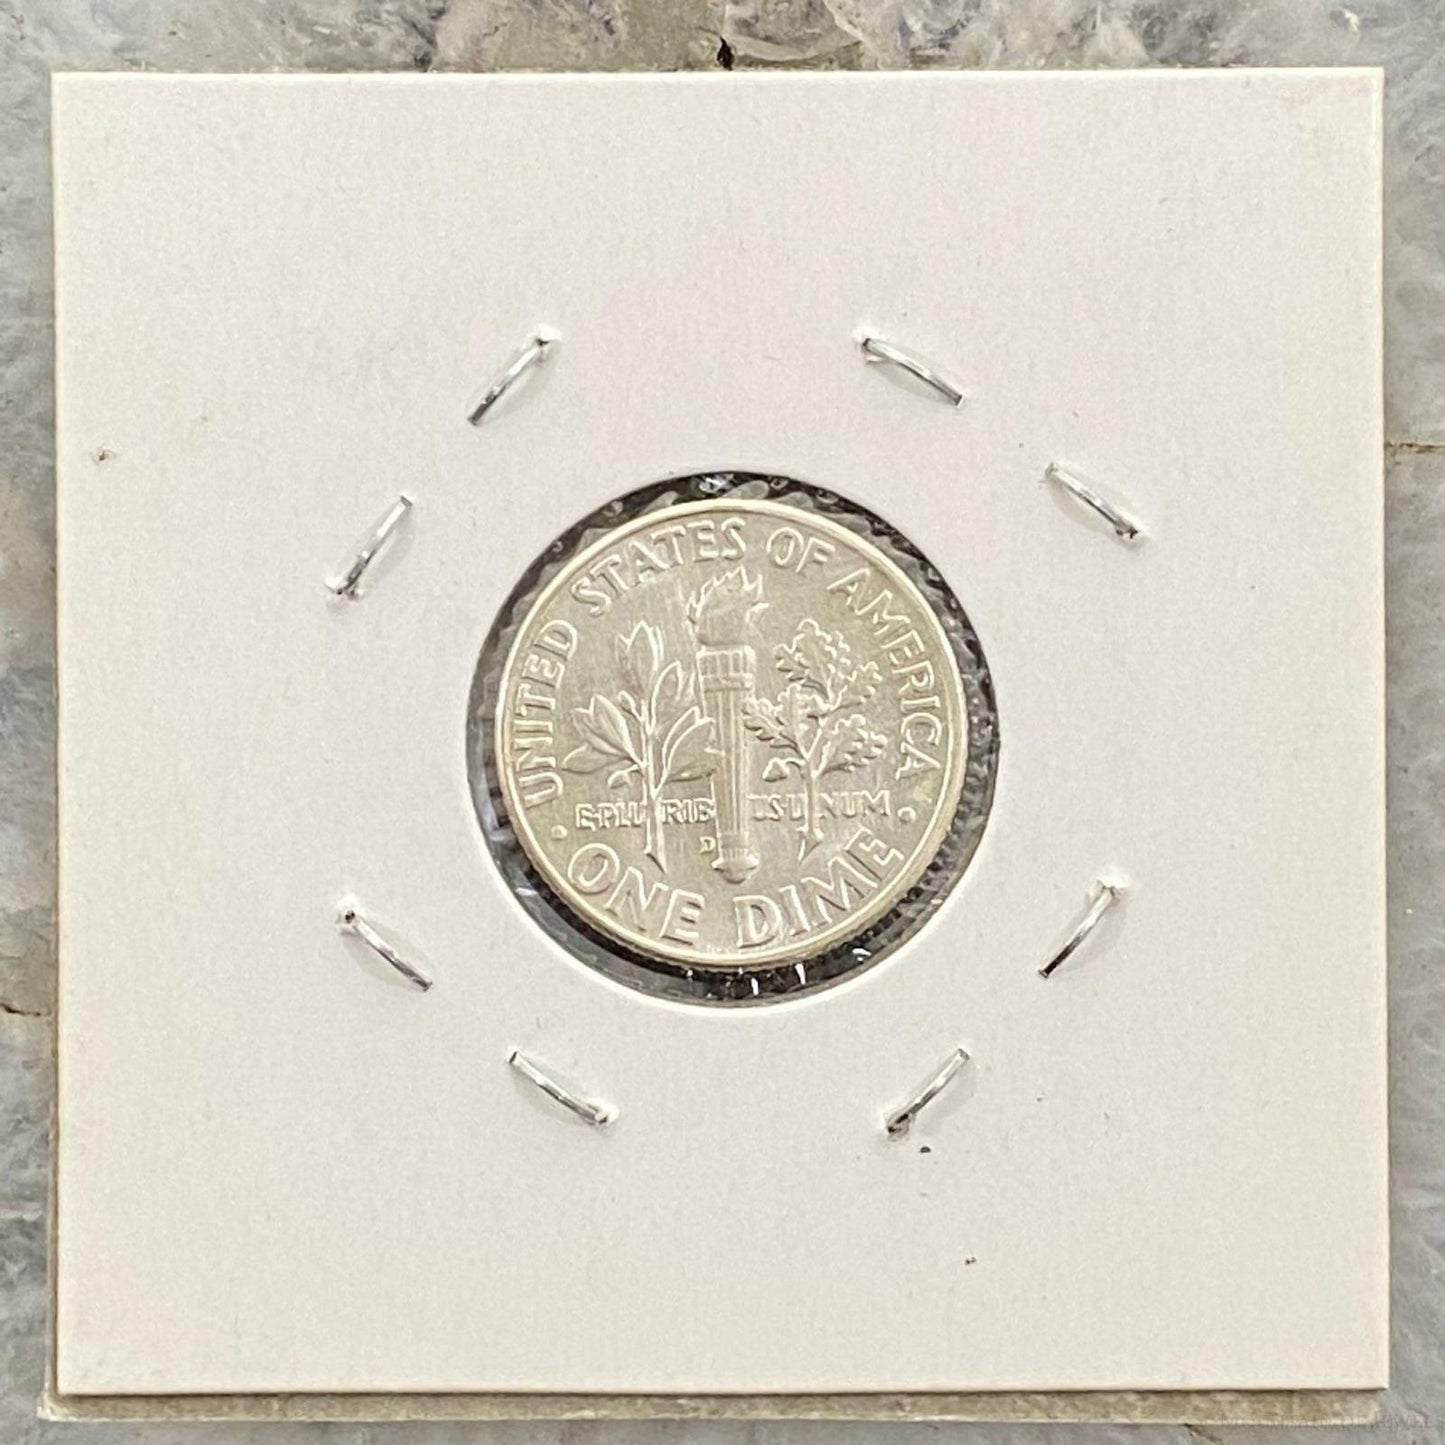 1964-D US Roosevelt Dime .900 Silver BU Collectible Coin #122321-4 - Mountain of Jewels